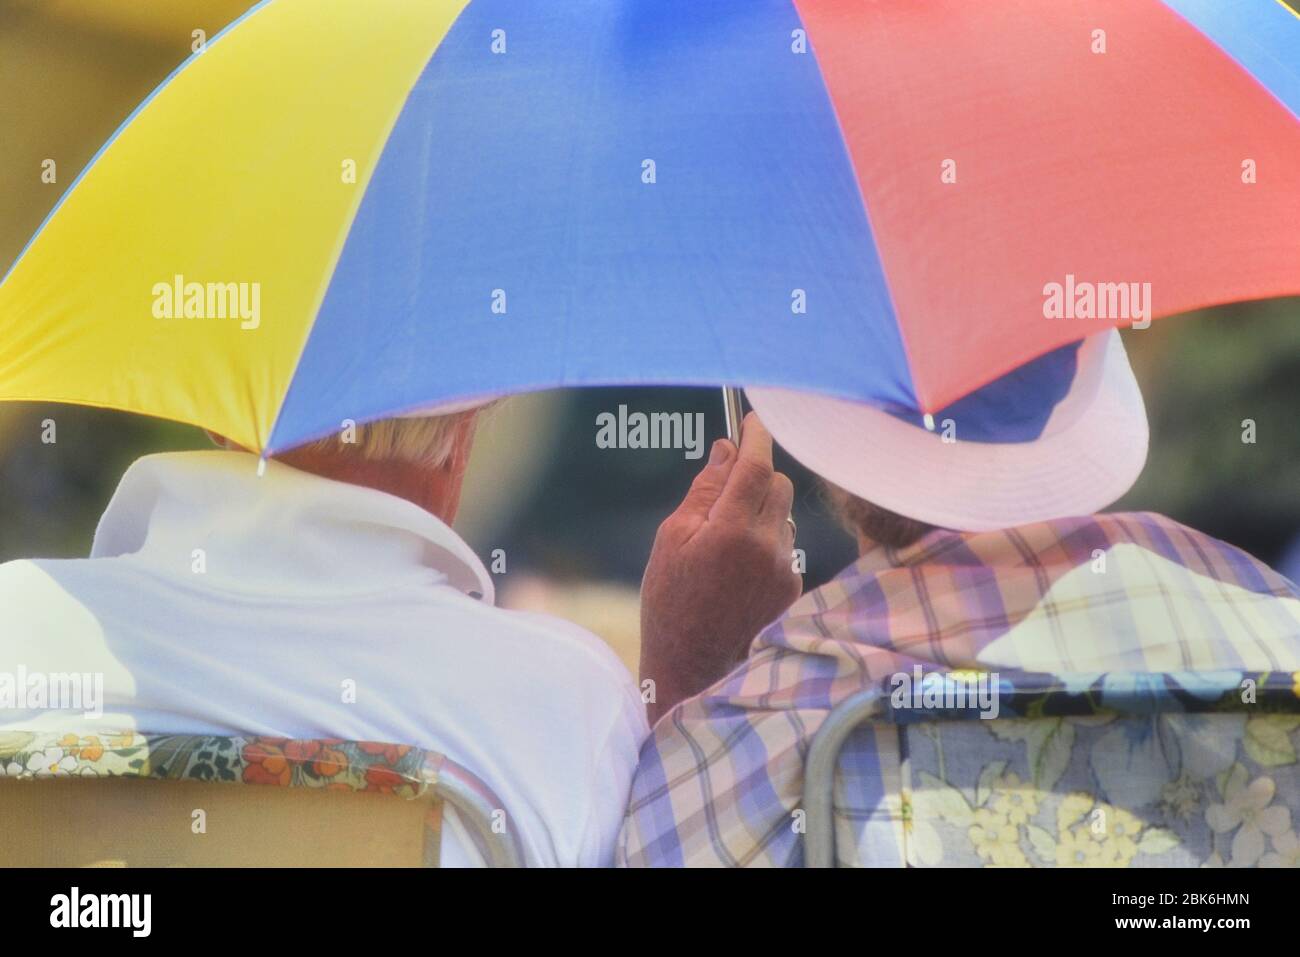 Elderly couple sitting under an umbrella offering protection from the heat and sunshine, England, Britain, UK Stock Photo